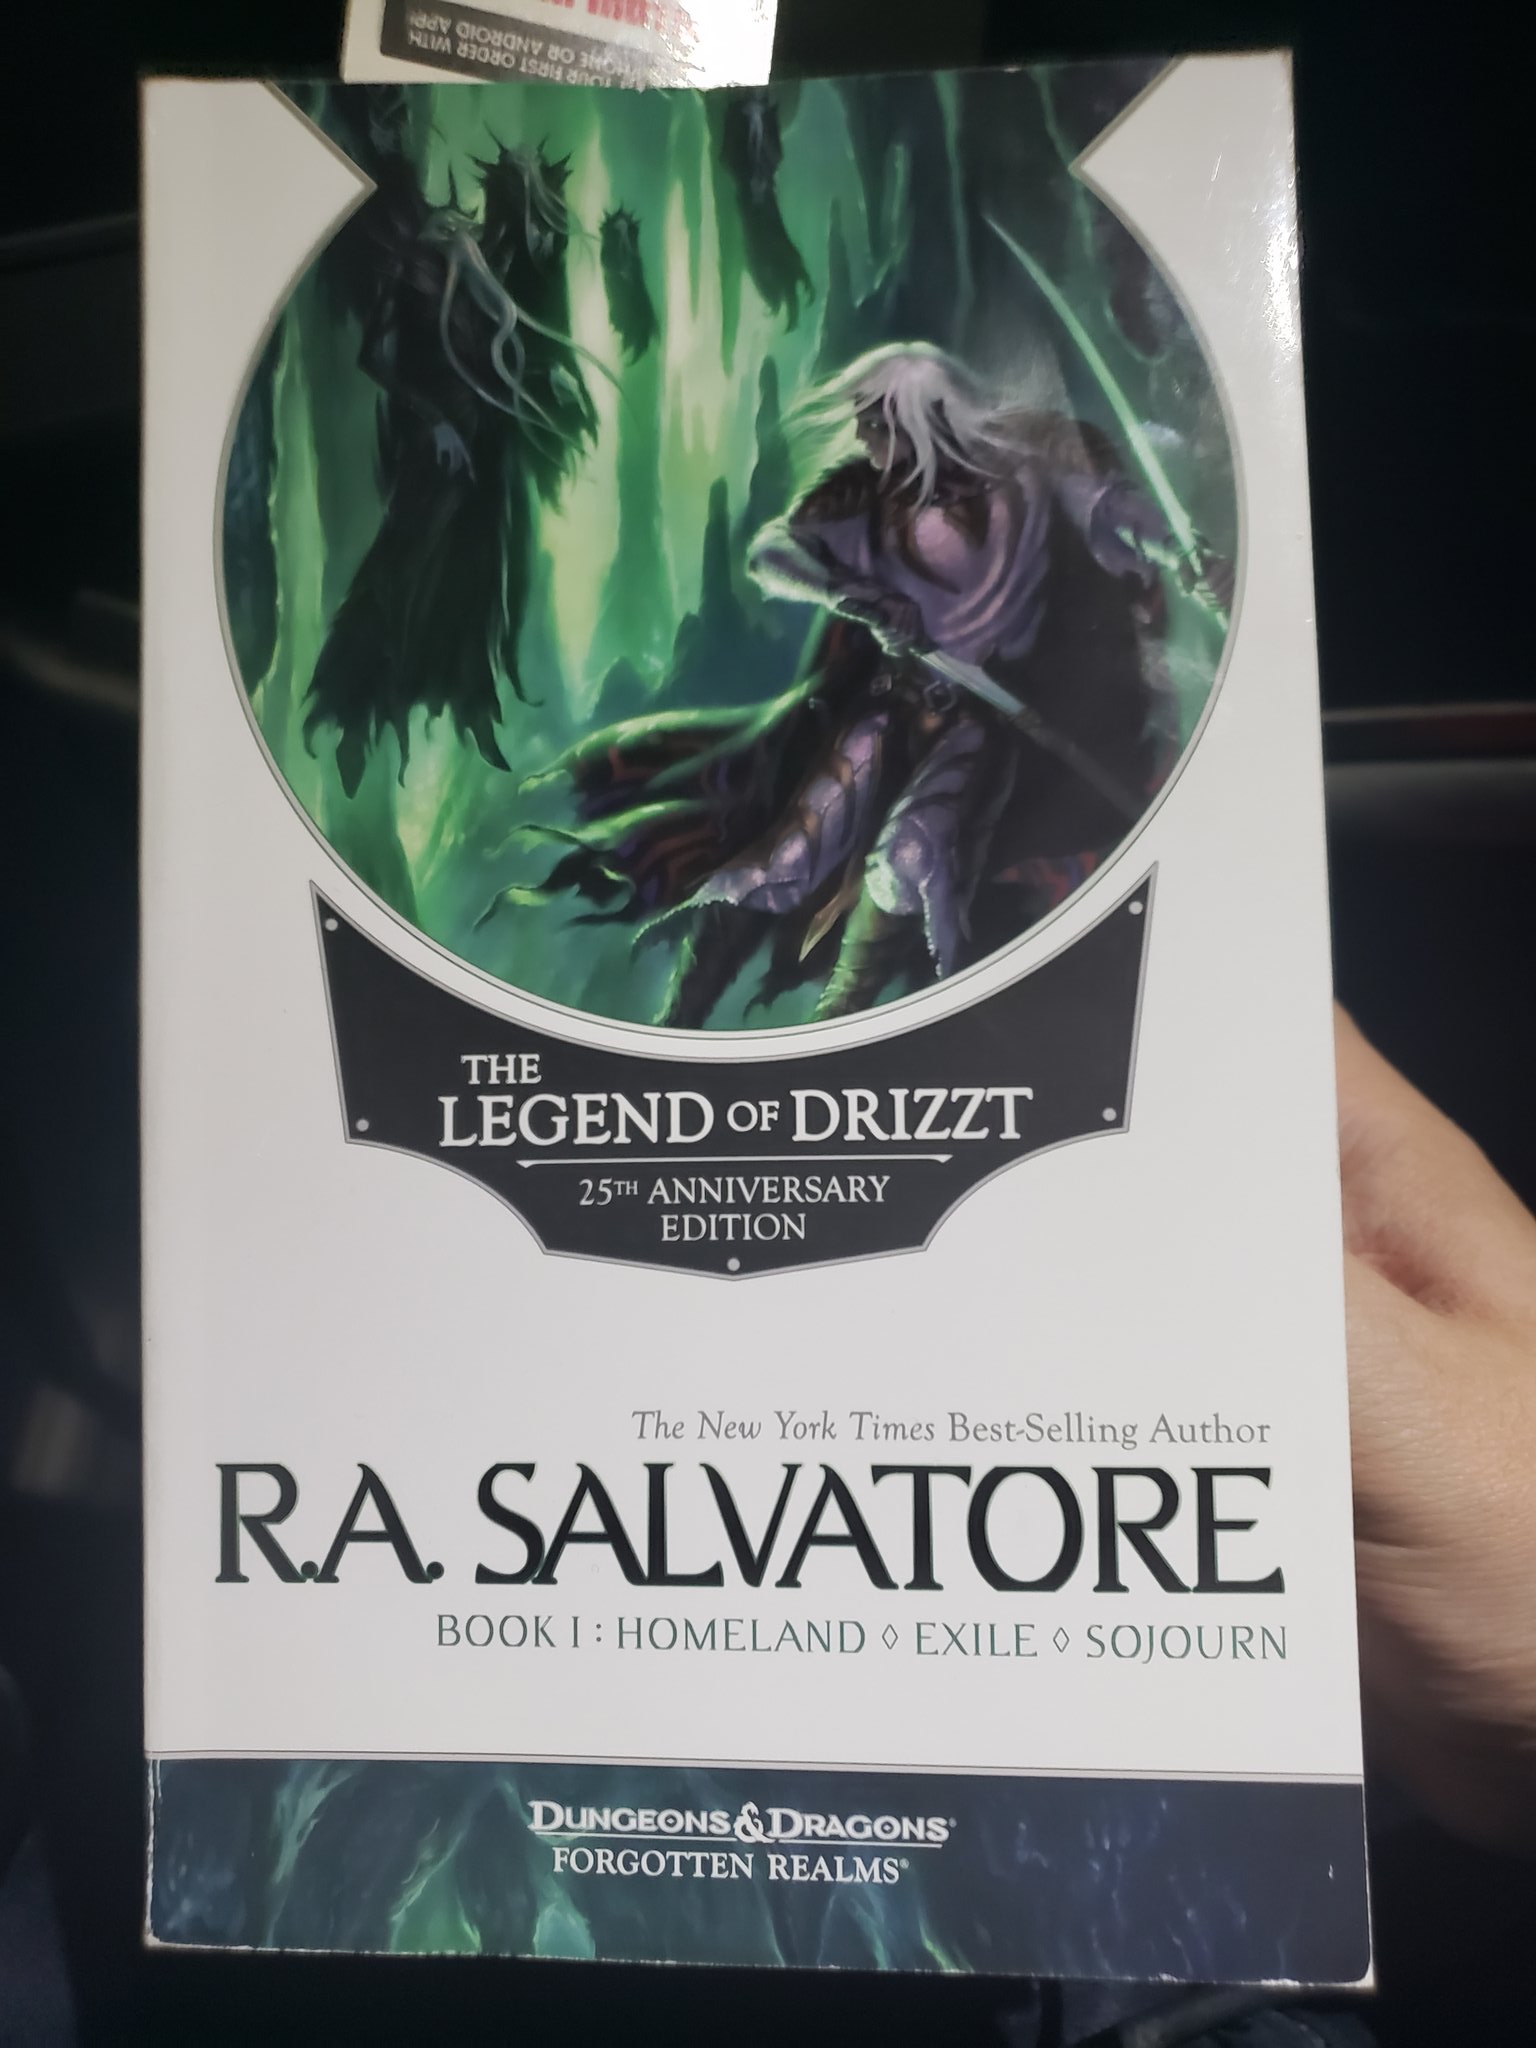 The Legend of Drizzt 25th Anniversary Edition, Book III by R. A.